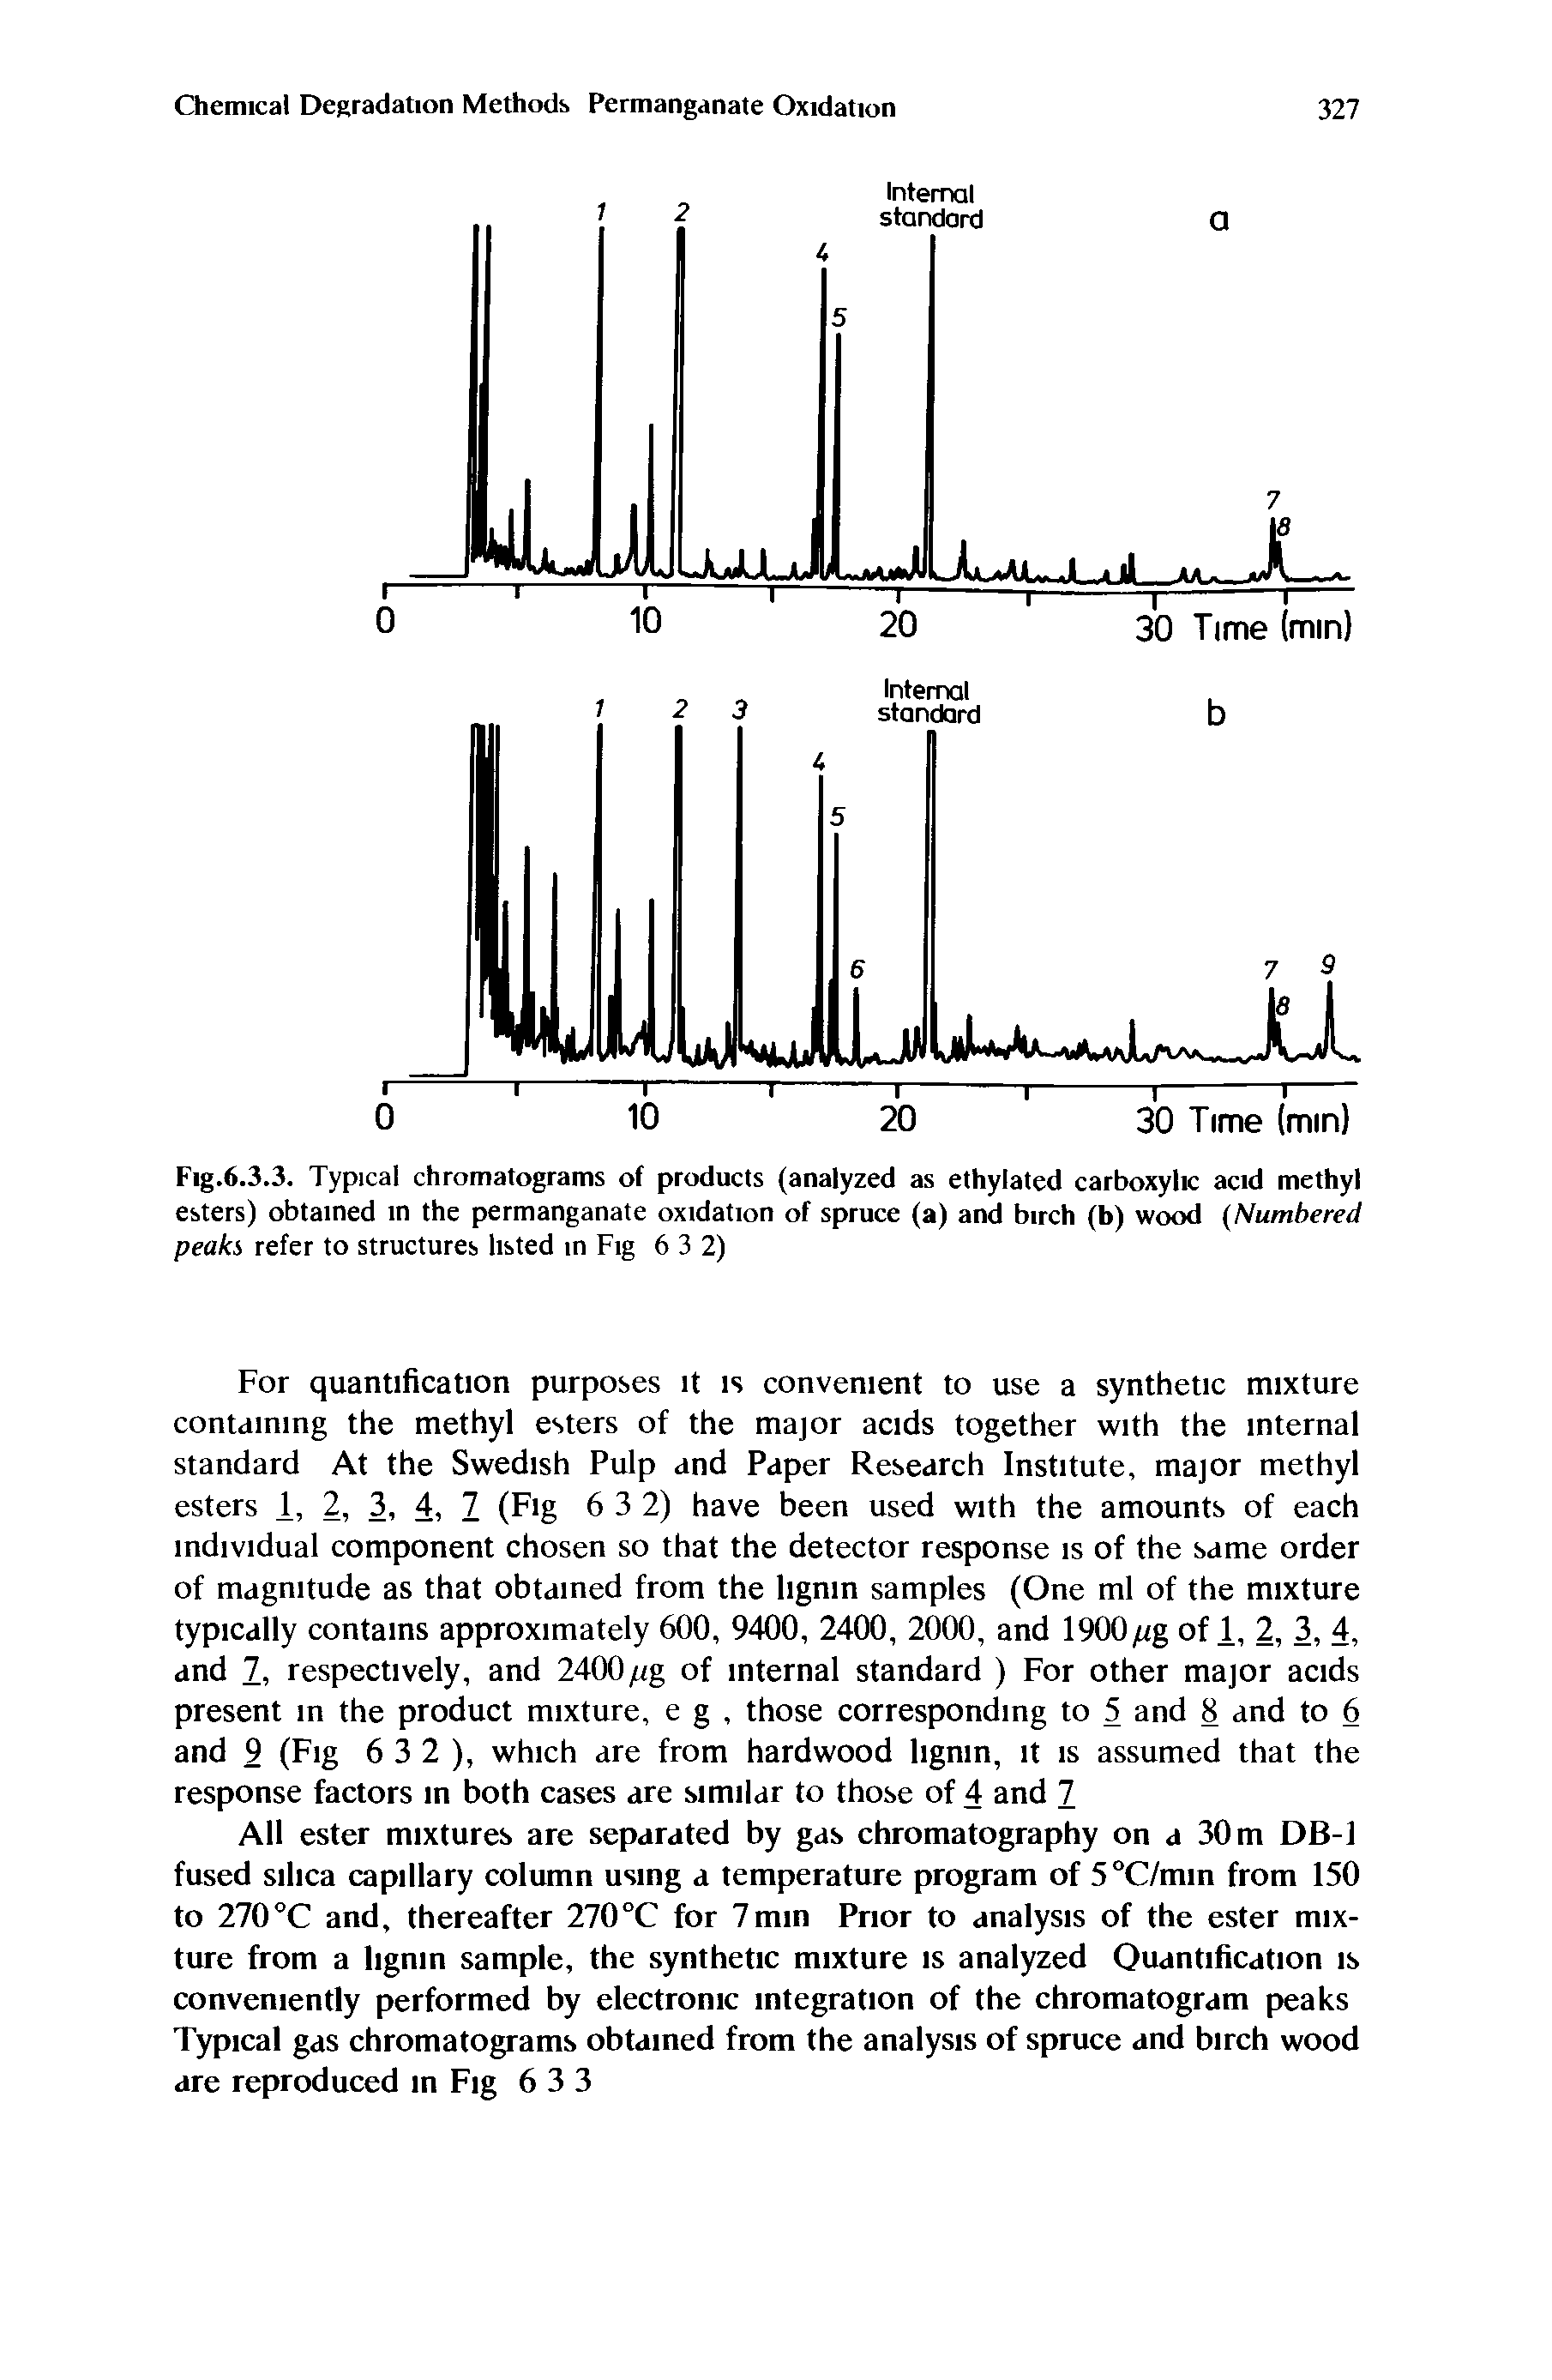 Fig.6.3.3. Typical chromatograms of products (analyzed as ethylated carboxylic acid methyl esters) obtained in the permanganate oxidation of spruce (a) and birch (b) wood (Numbered peaks refer to structures listed in Fig 6 3 2)...